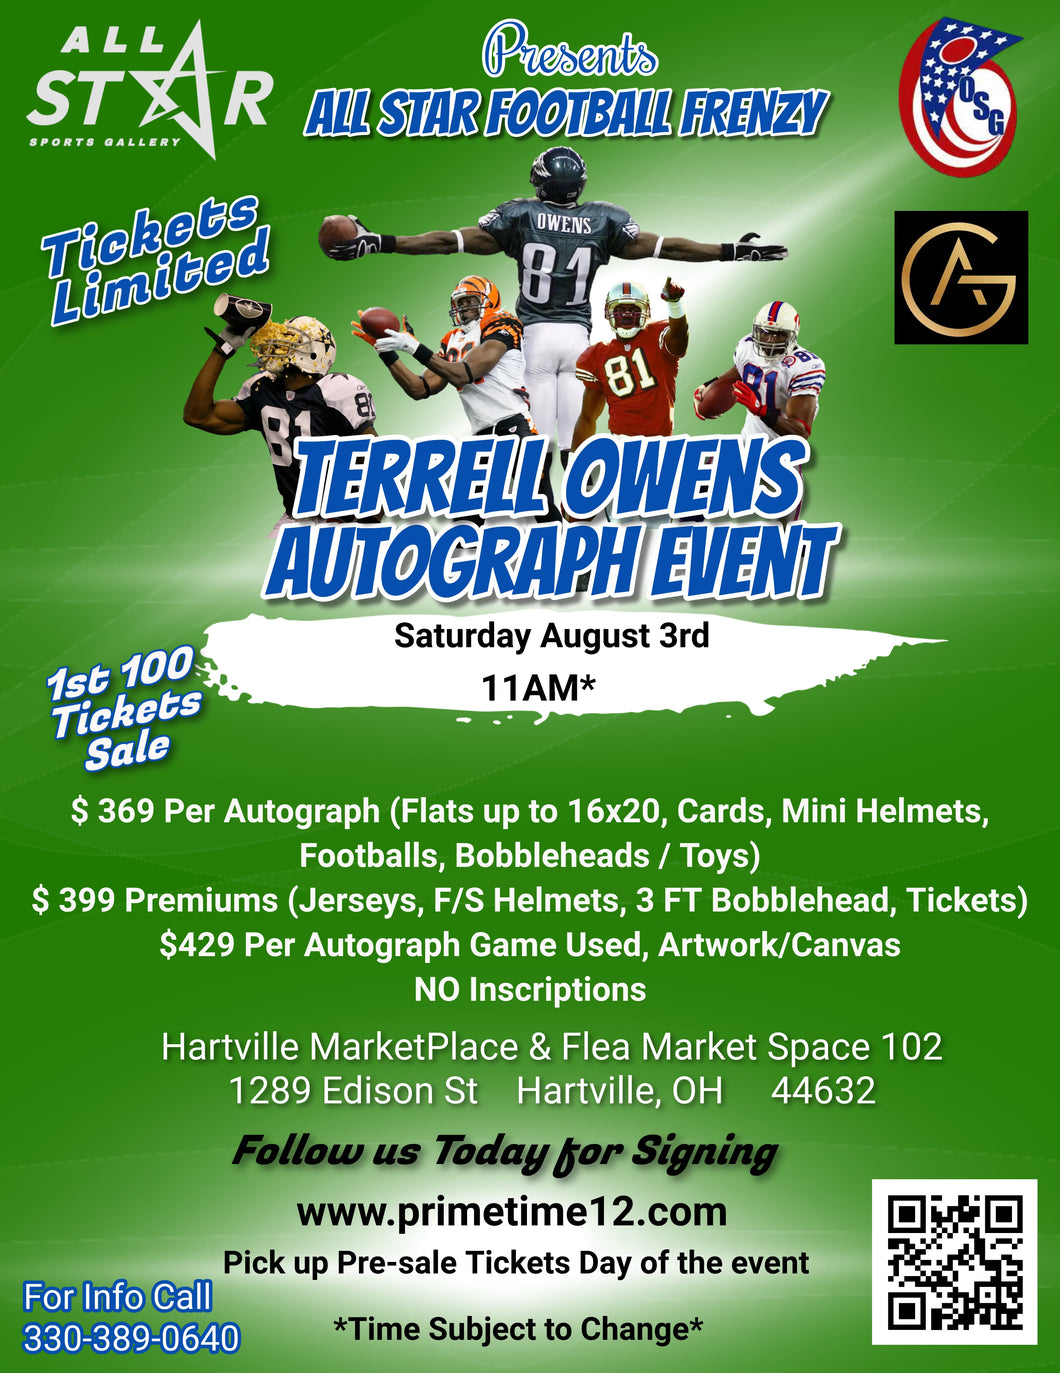 Terrell Owens Pre-Sale ticket for autograph signing on Jersey, Full-Size Helmet, 3 Foot Bobblehead, or Ticket